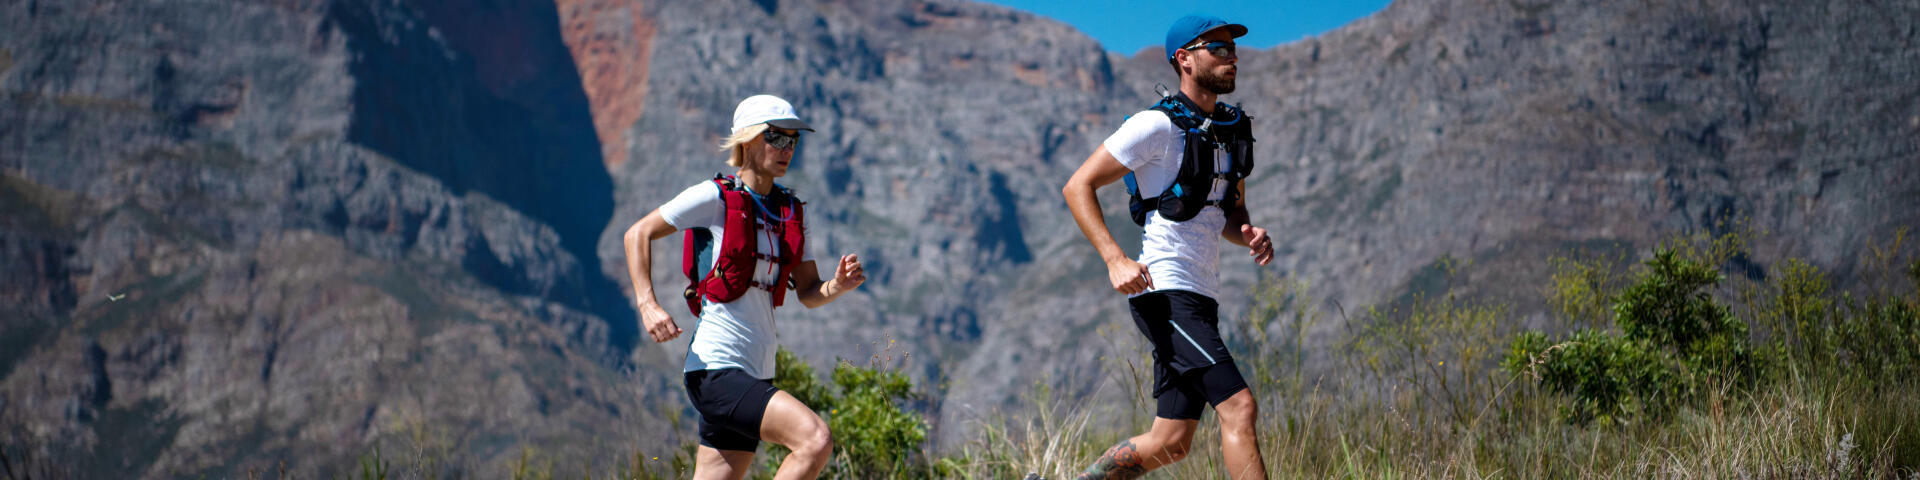 a man and a woman running in hot weather on the mountain